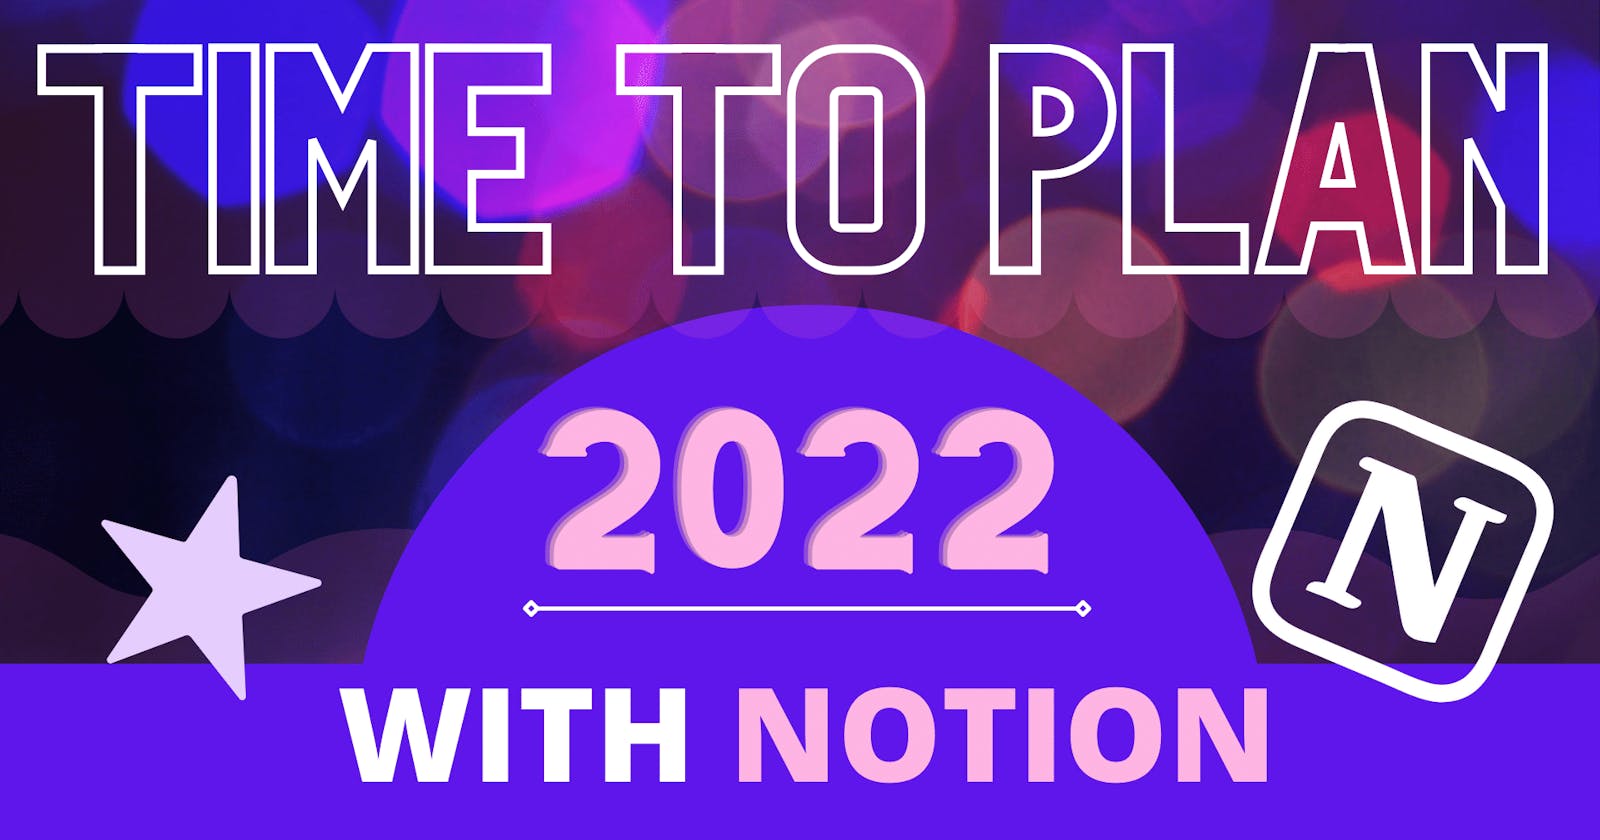 Set up your NOTION space for 2022 NOW!